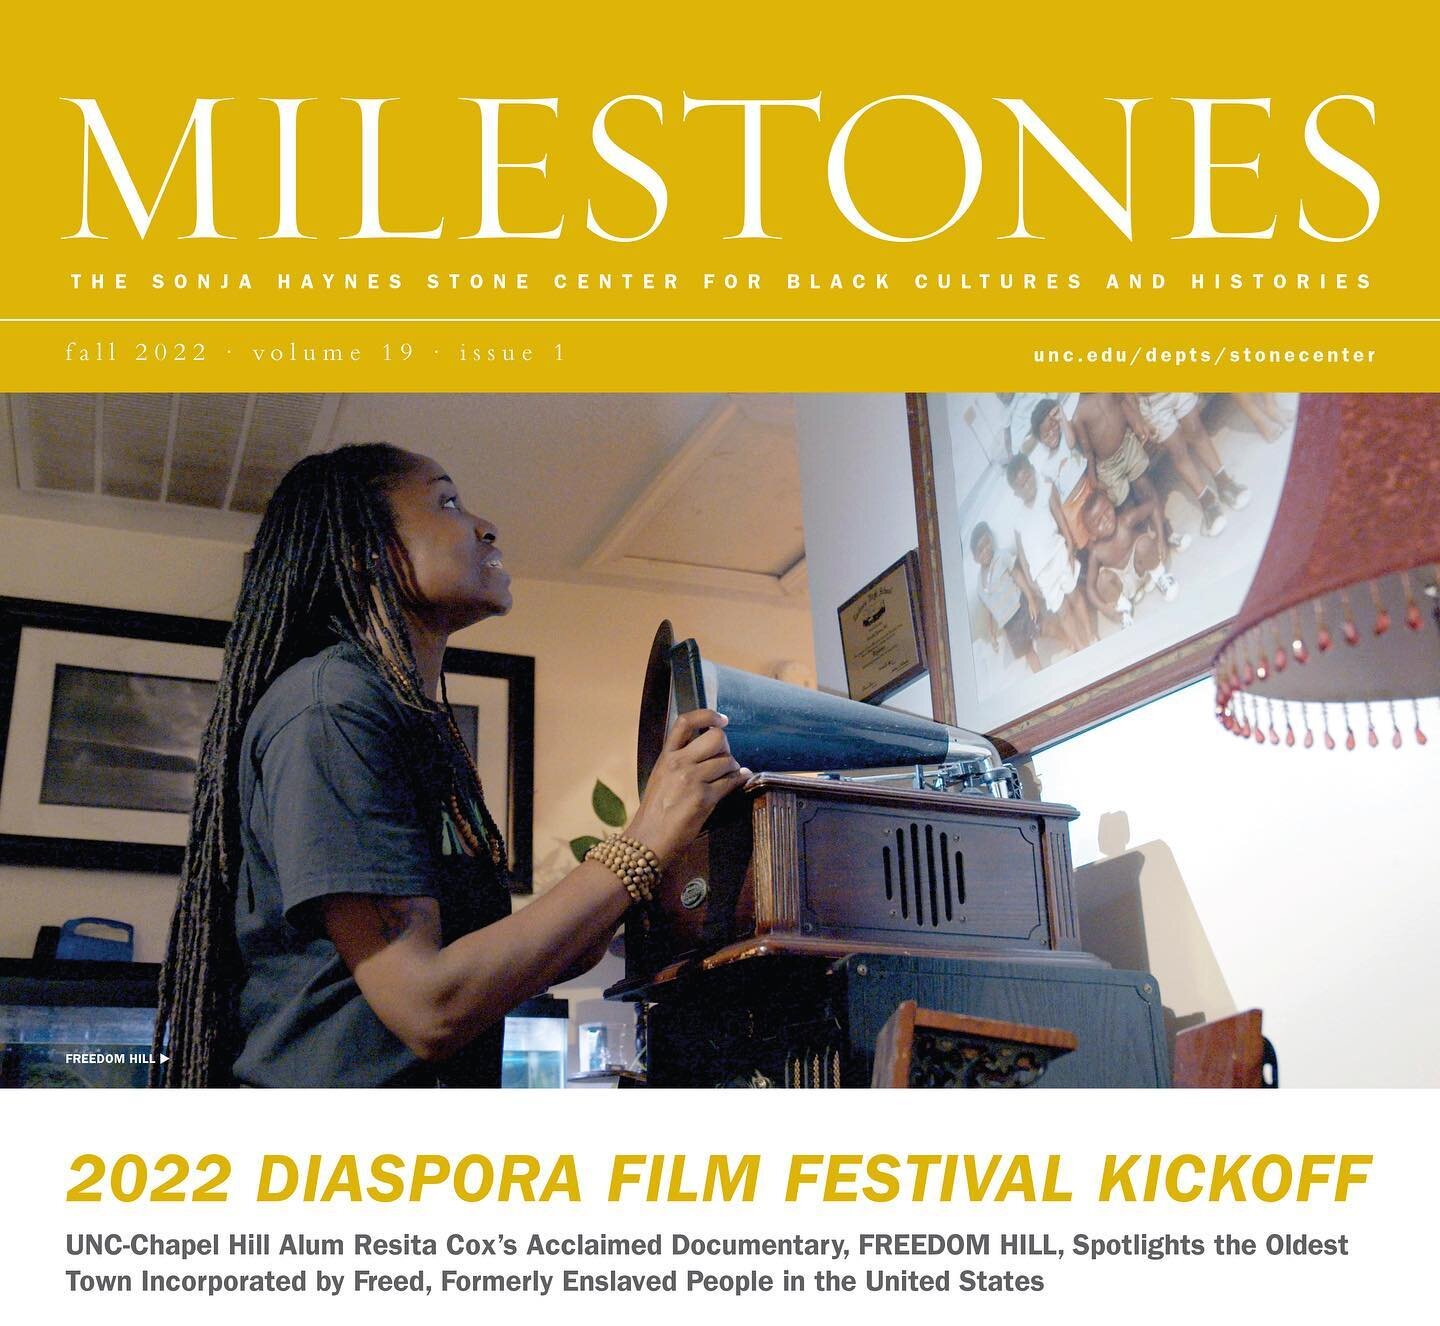 Mark your calendars! @FreedomHillDoc is screening at Diapsora Film Festival on September 29.

Get your tickets today. Click the link in our bio to learn more.  #FreedomHillDoc